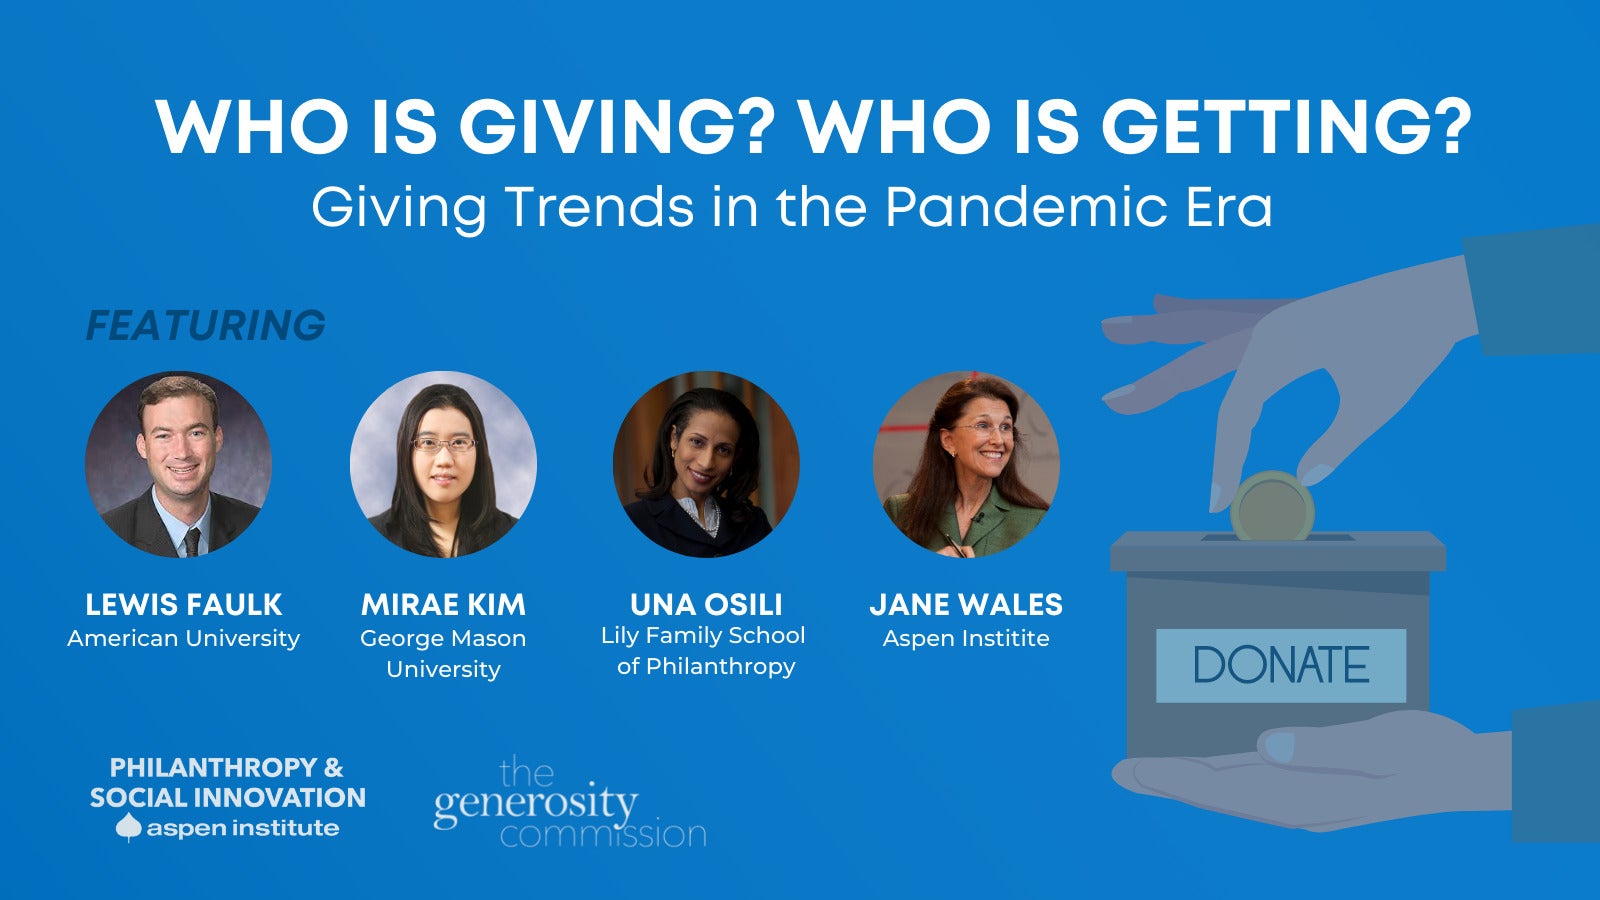 Who is Giving? Who is Getting? Giving Trends in the Pandemic Era